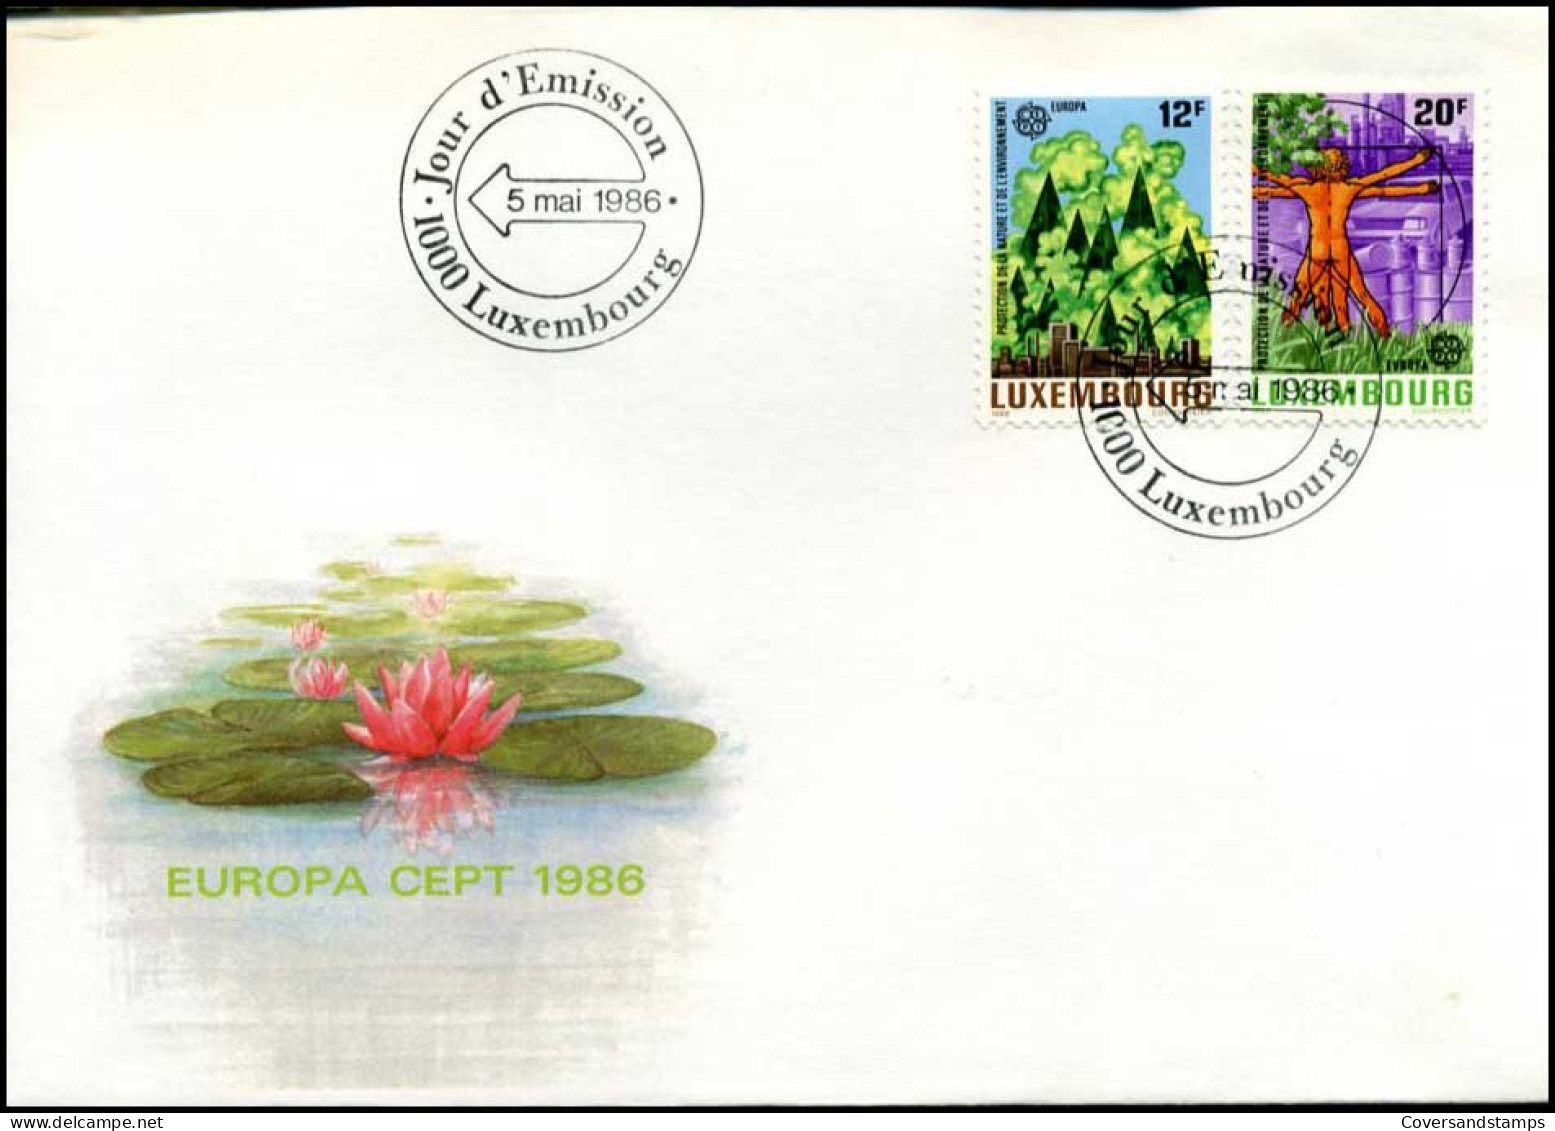 Luxembourg - FDC - Europa CEPT 1986 - FDC